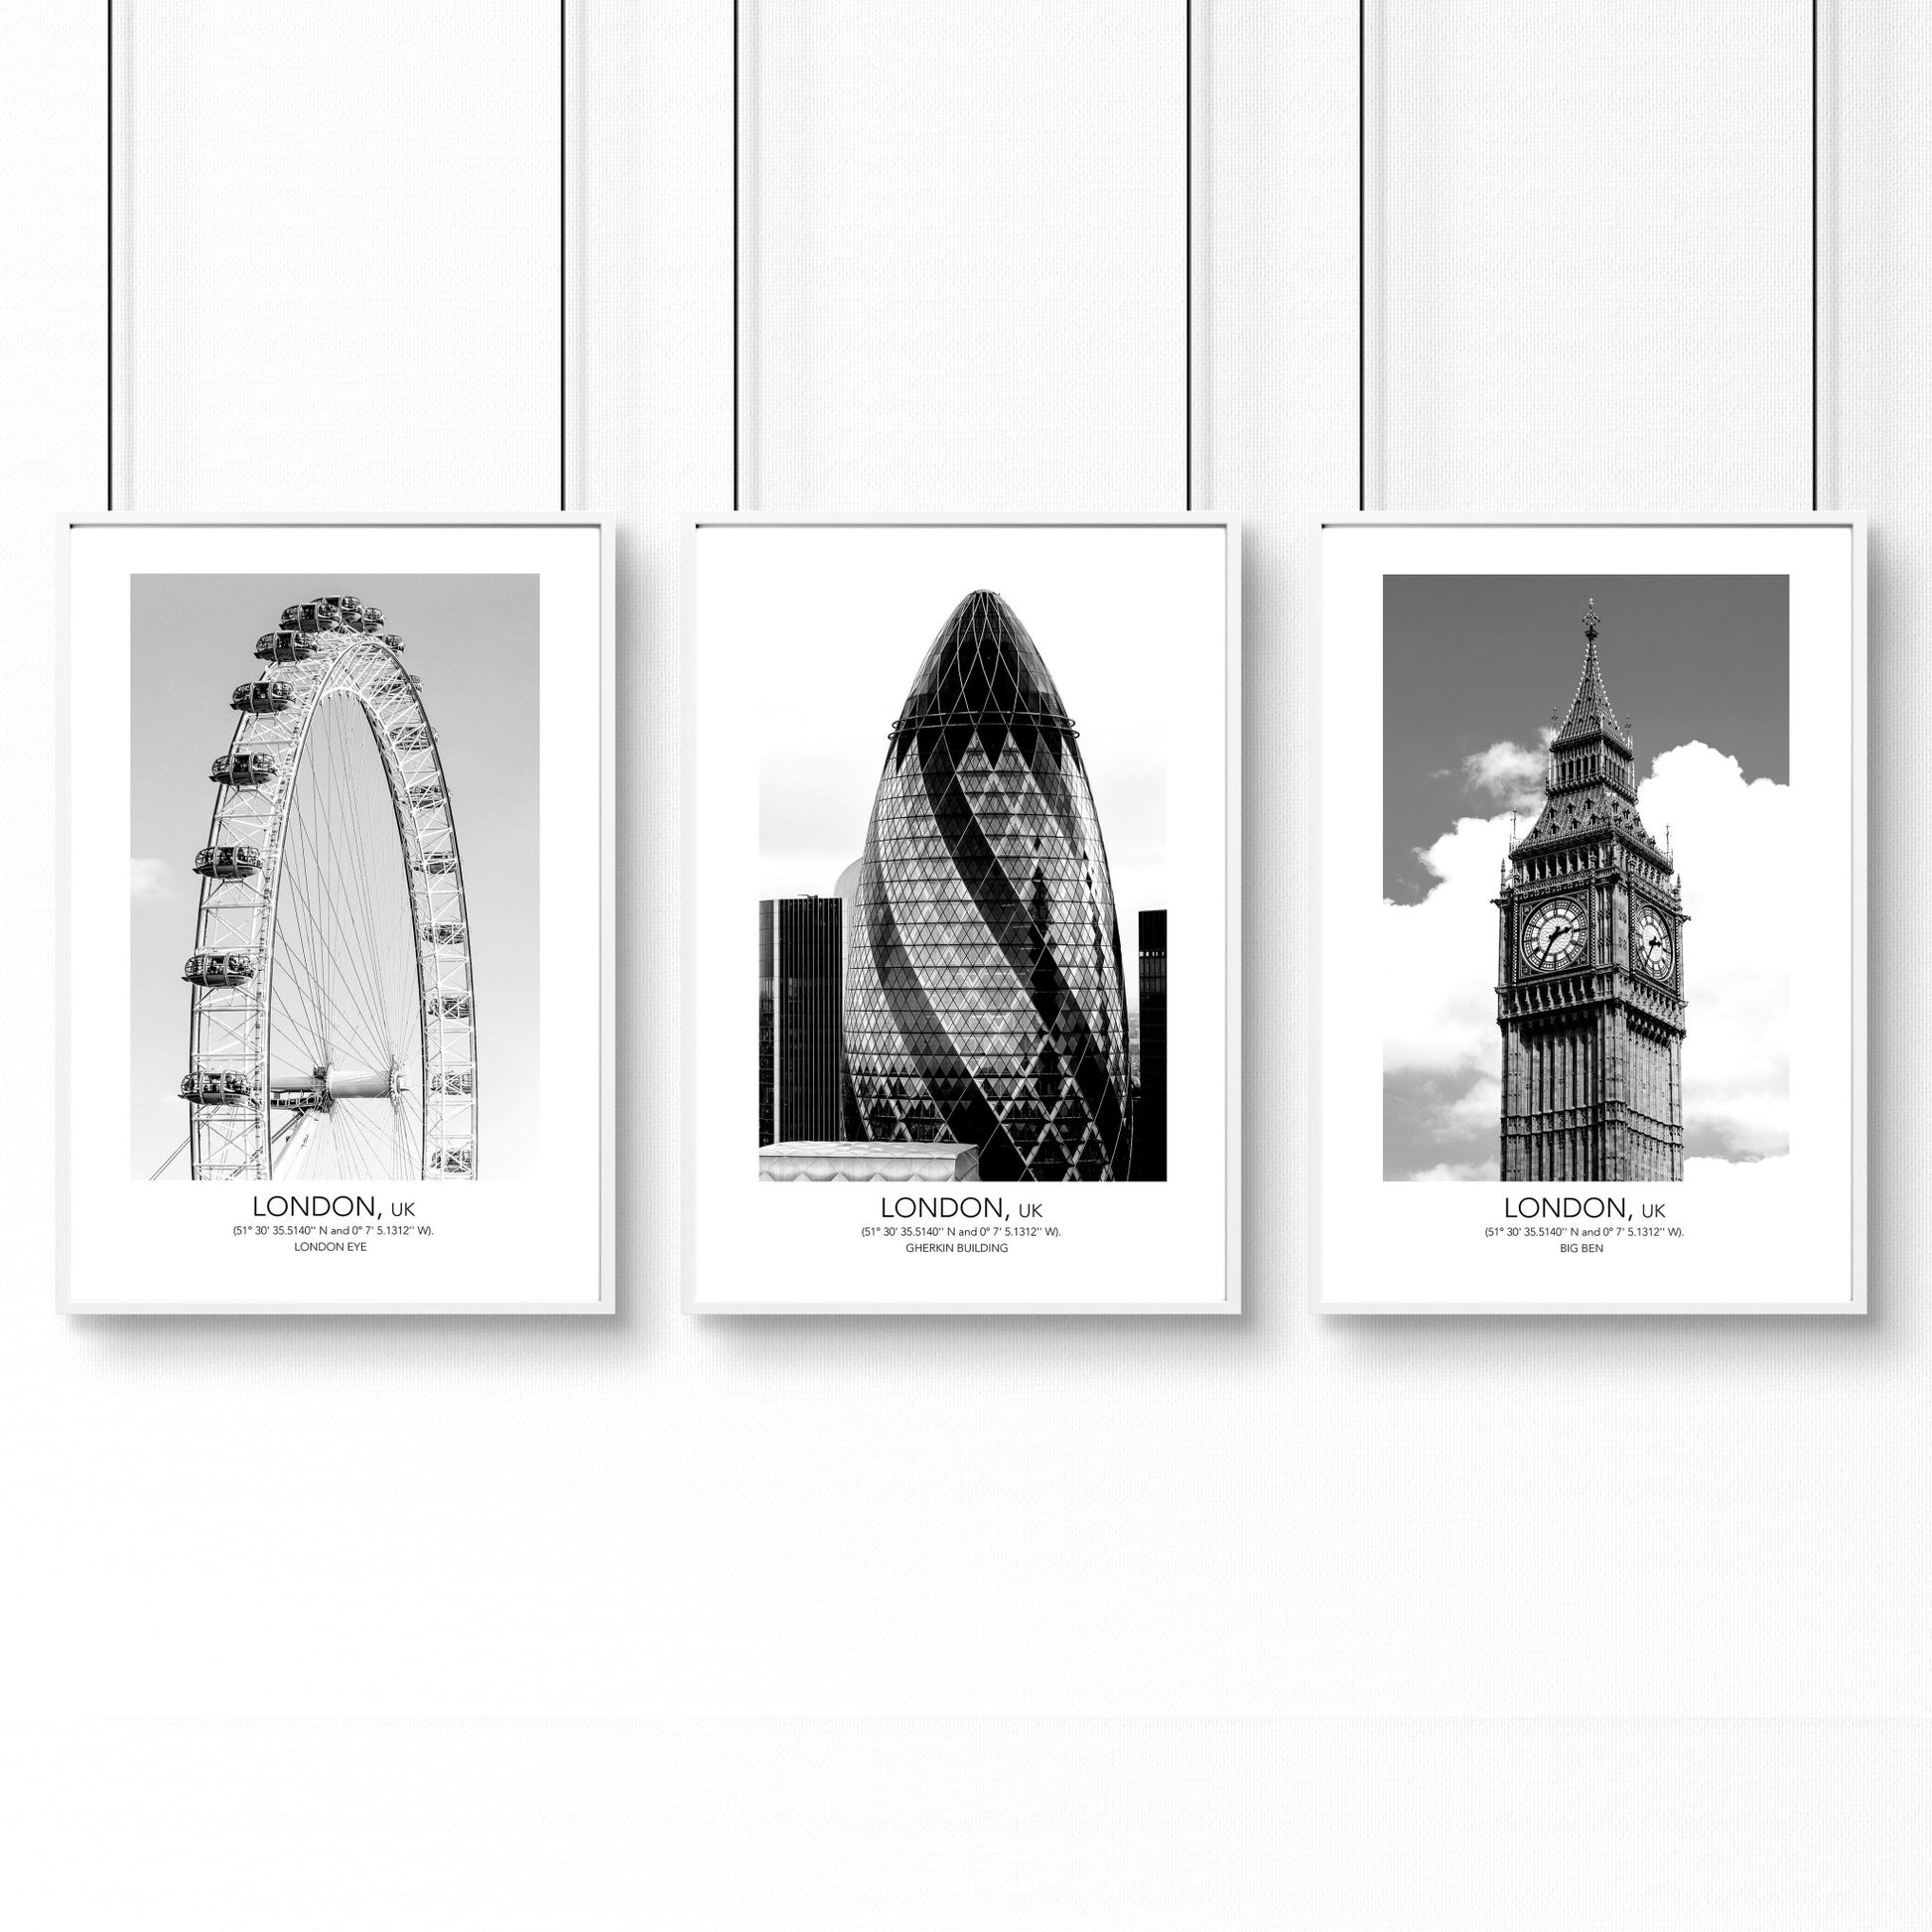 Wall pictures for living room ideas | set of 3 London wall art prints